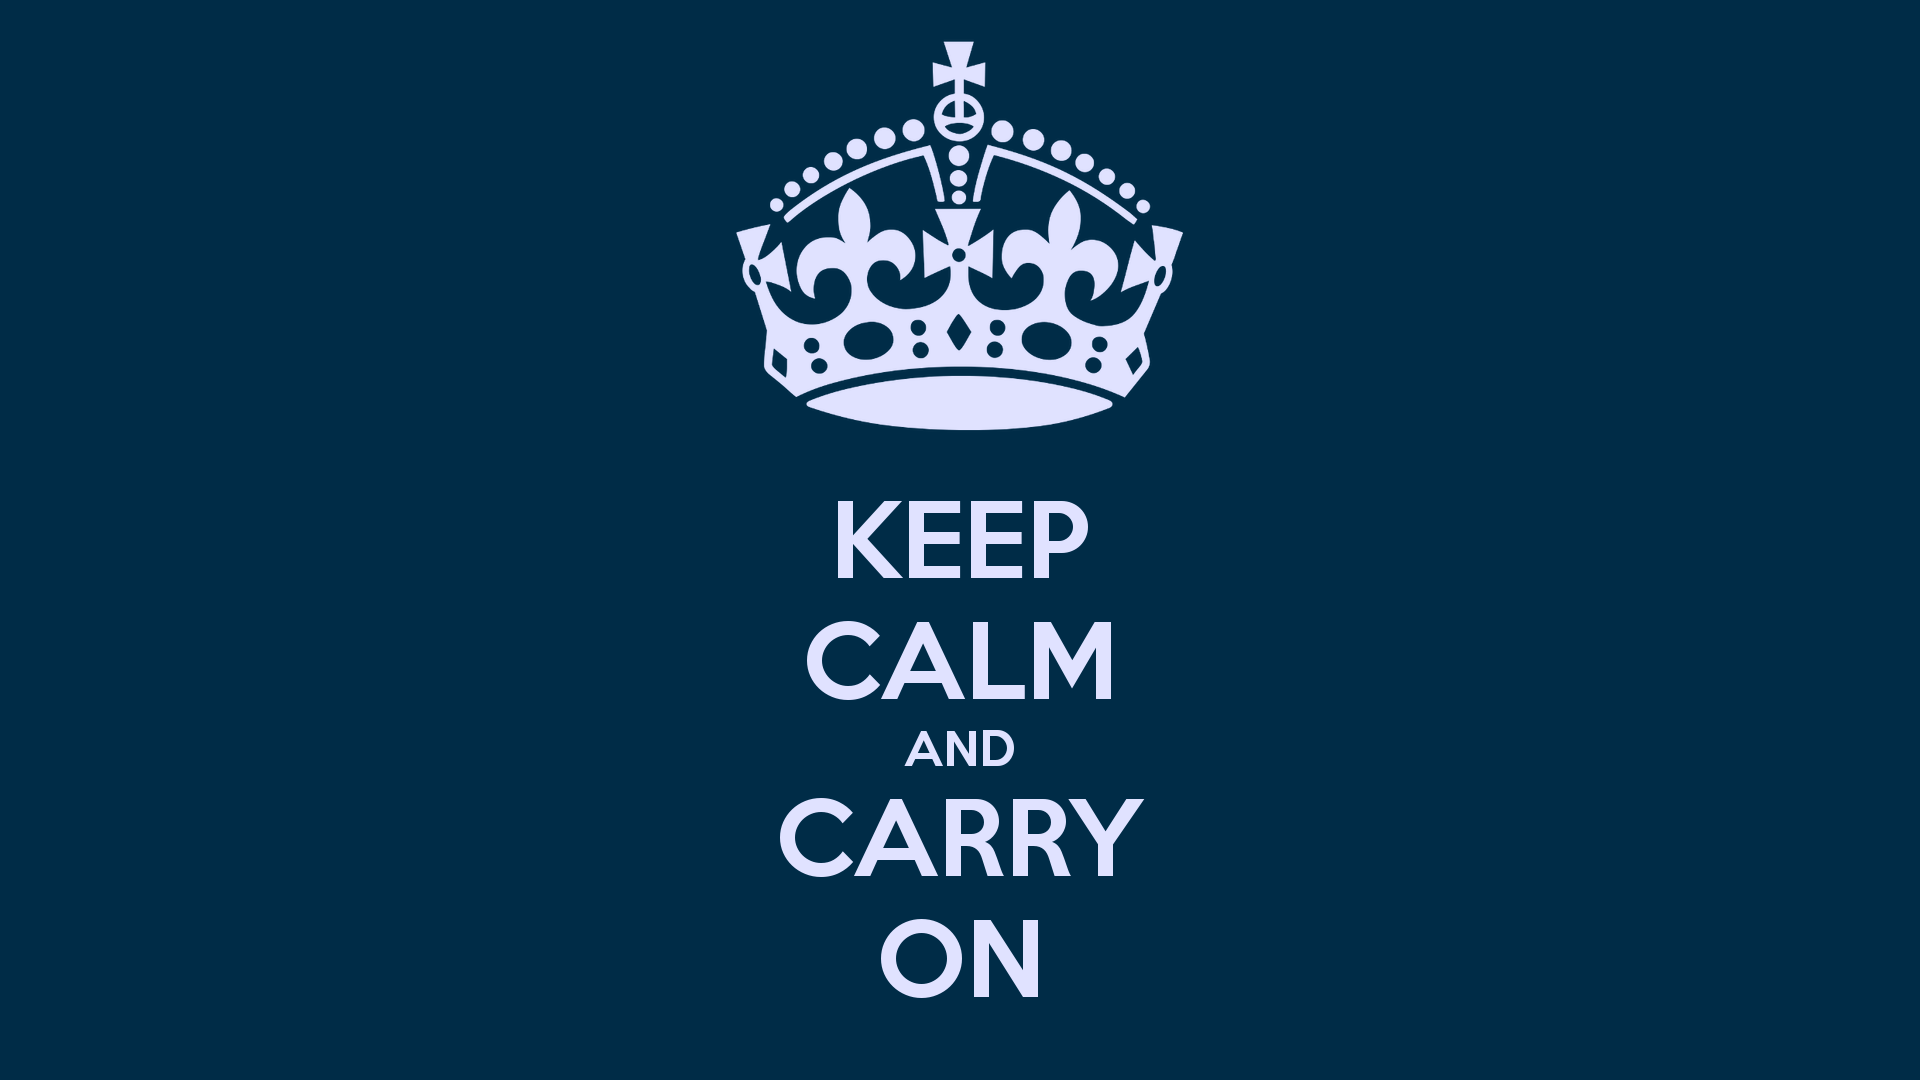 keep calm and carry on wallpaper,logo,text,crown,font,brand